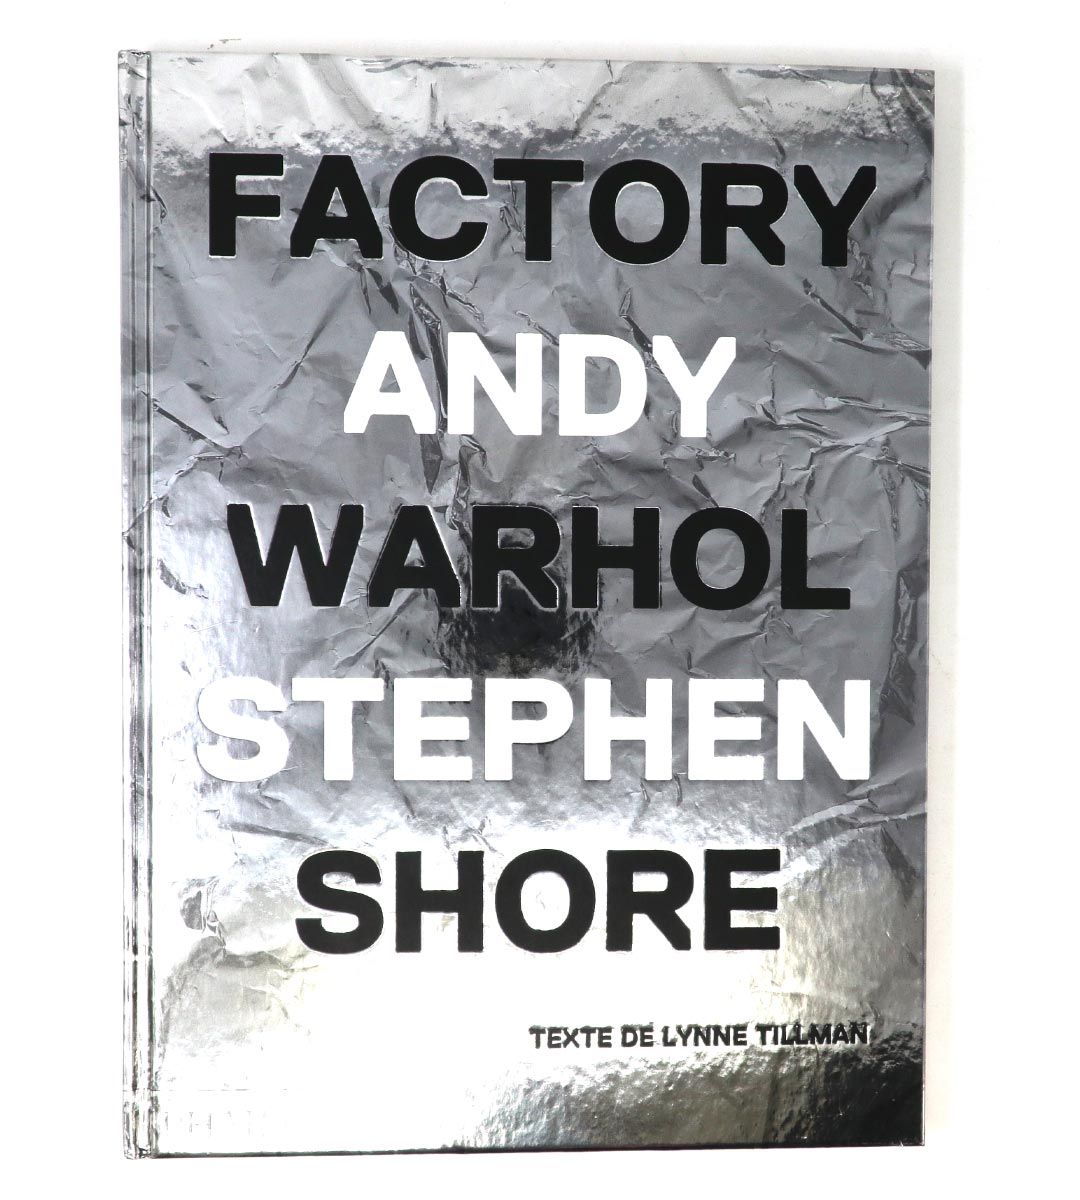 Factory : Andy Warhol